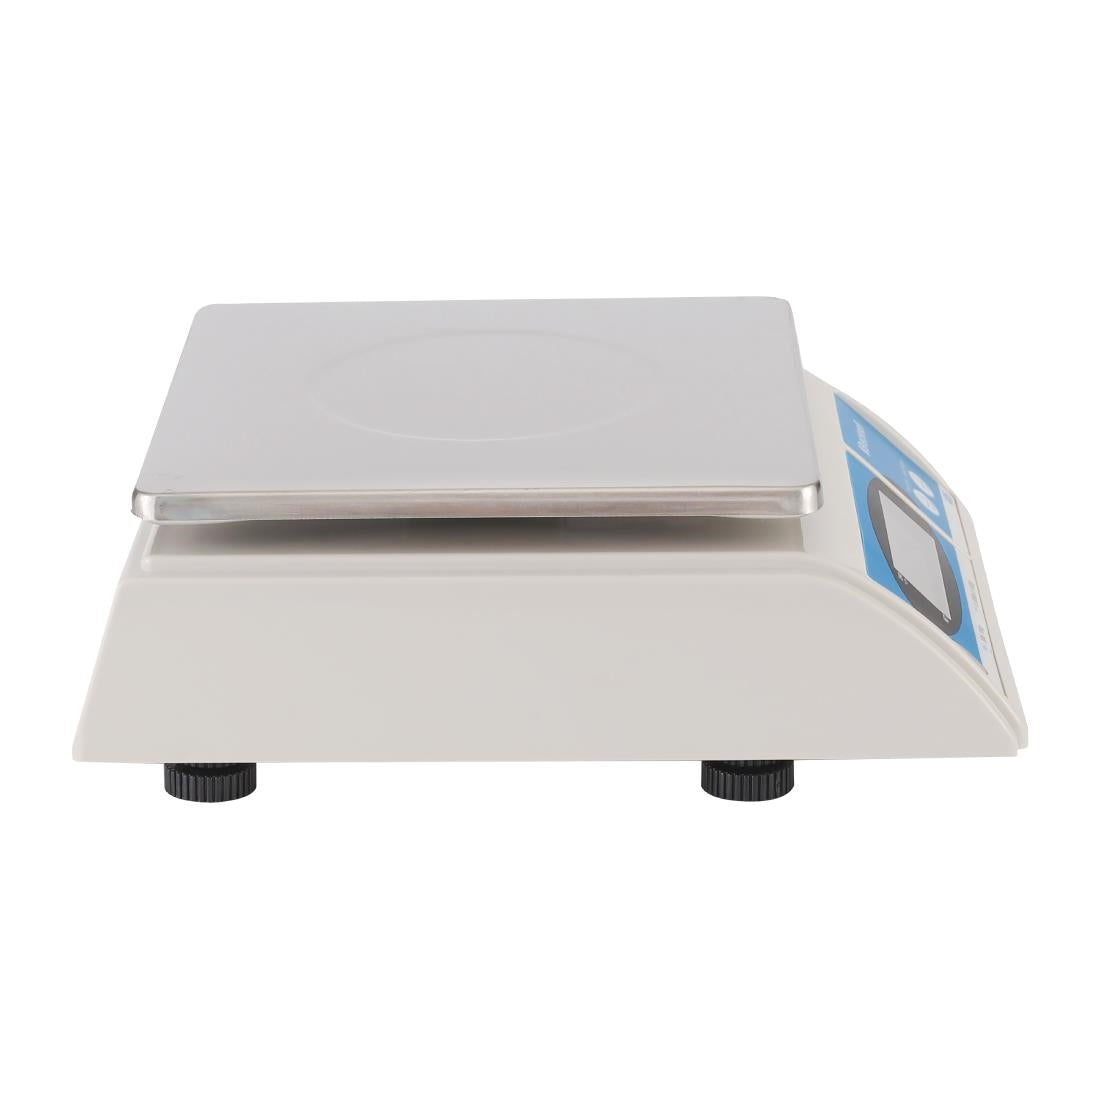 CH389 Brecknell Electronic Bench Scales 6kg JD Catering Equipment Solutions Ltd